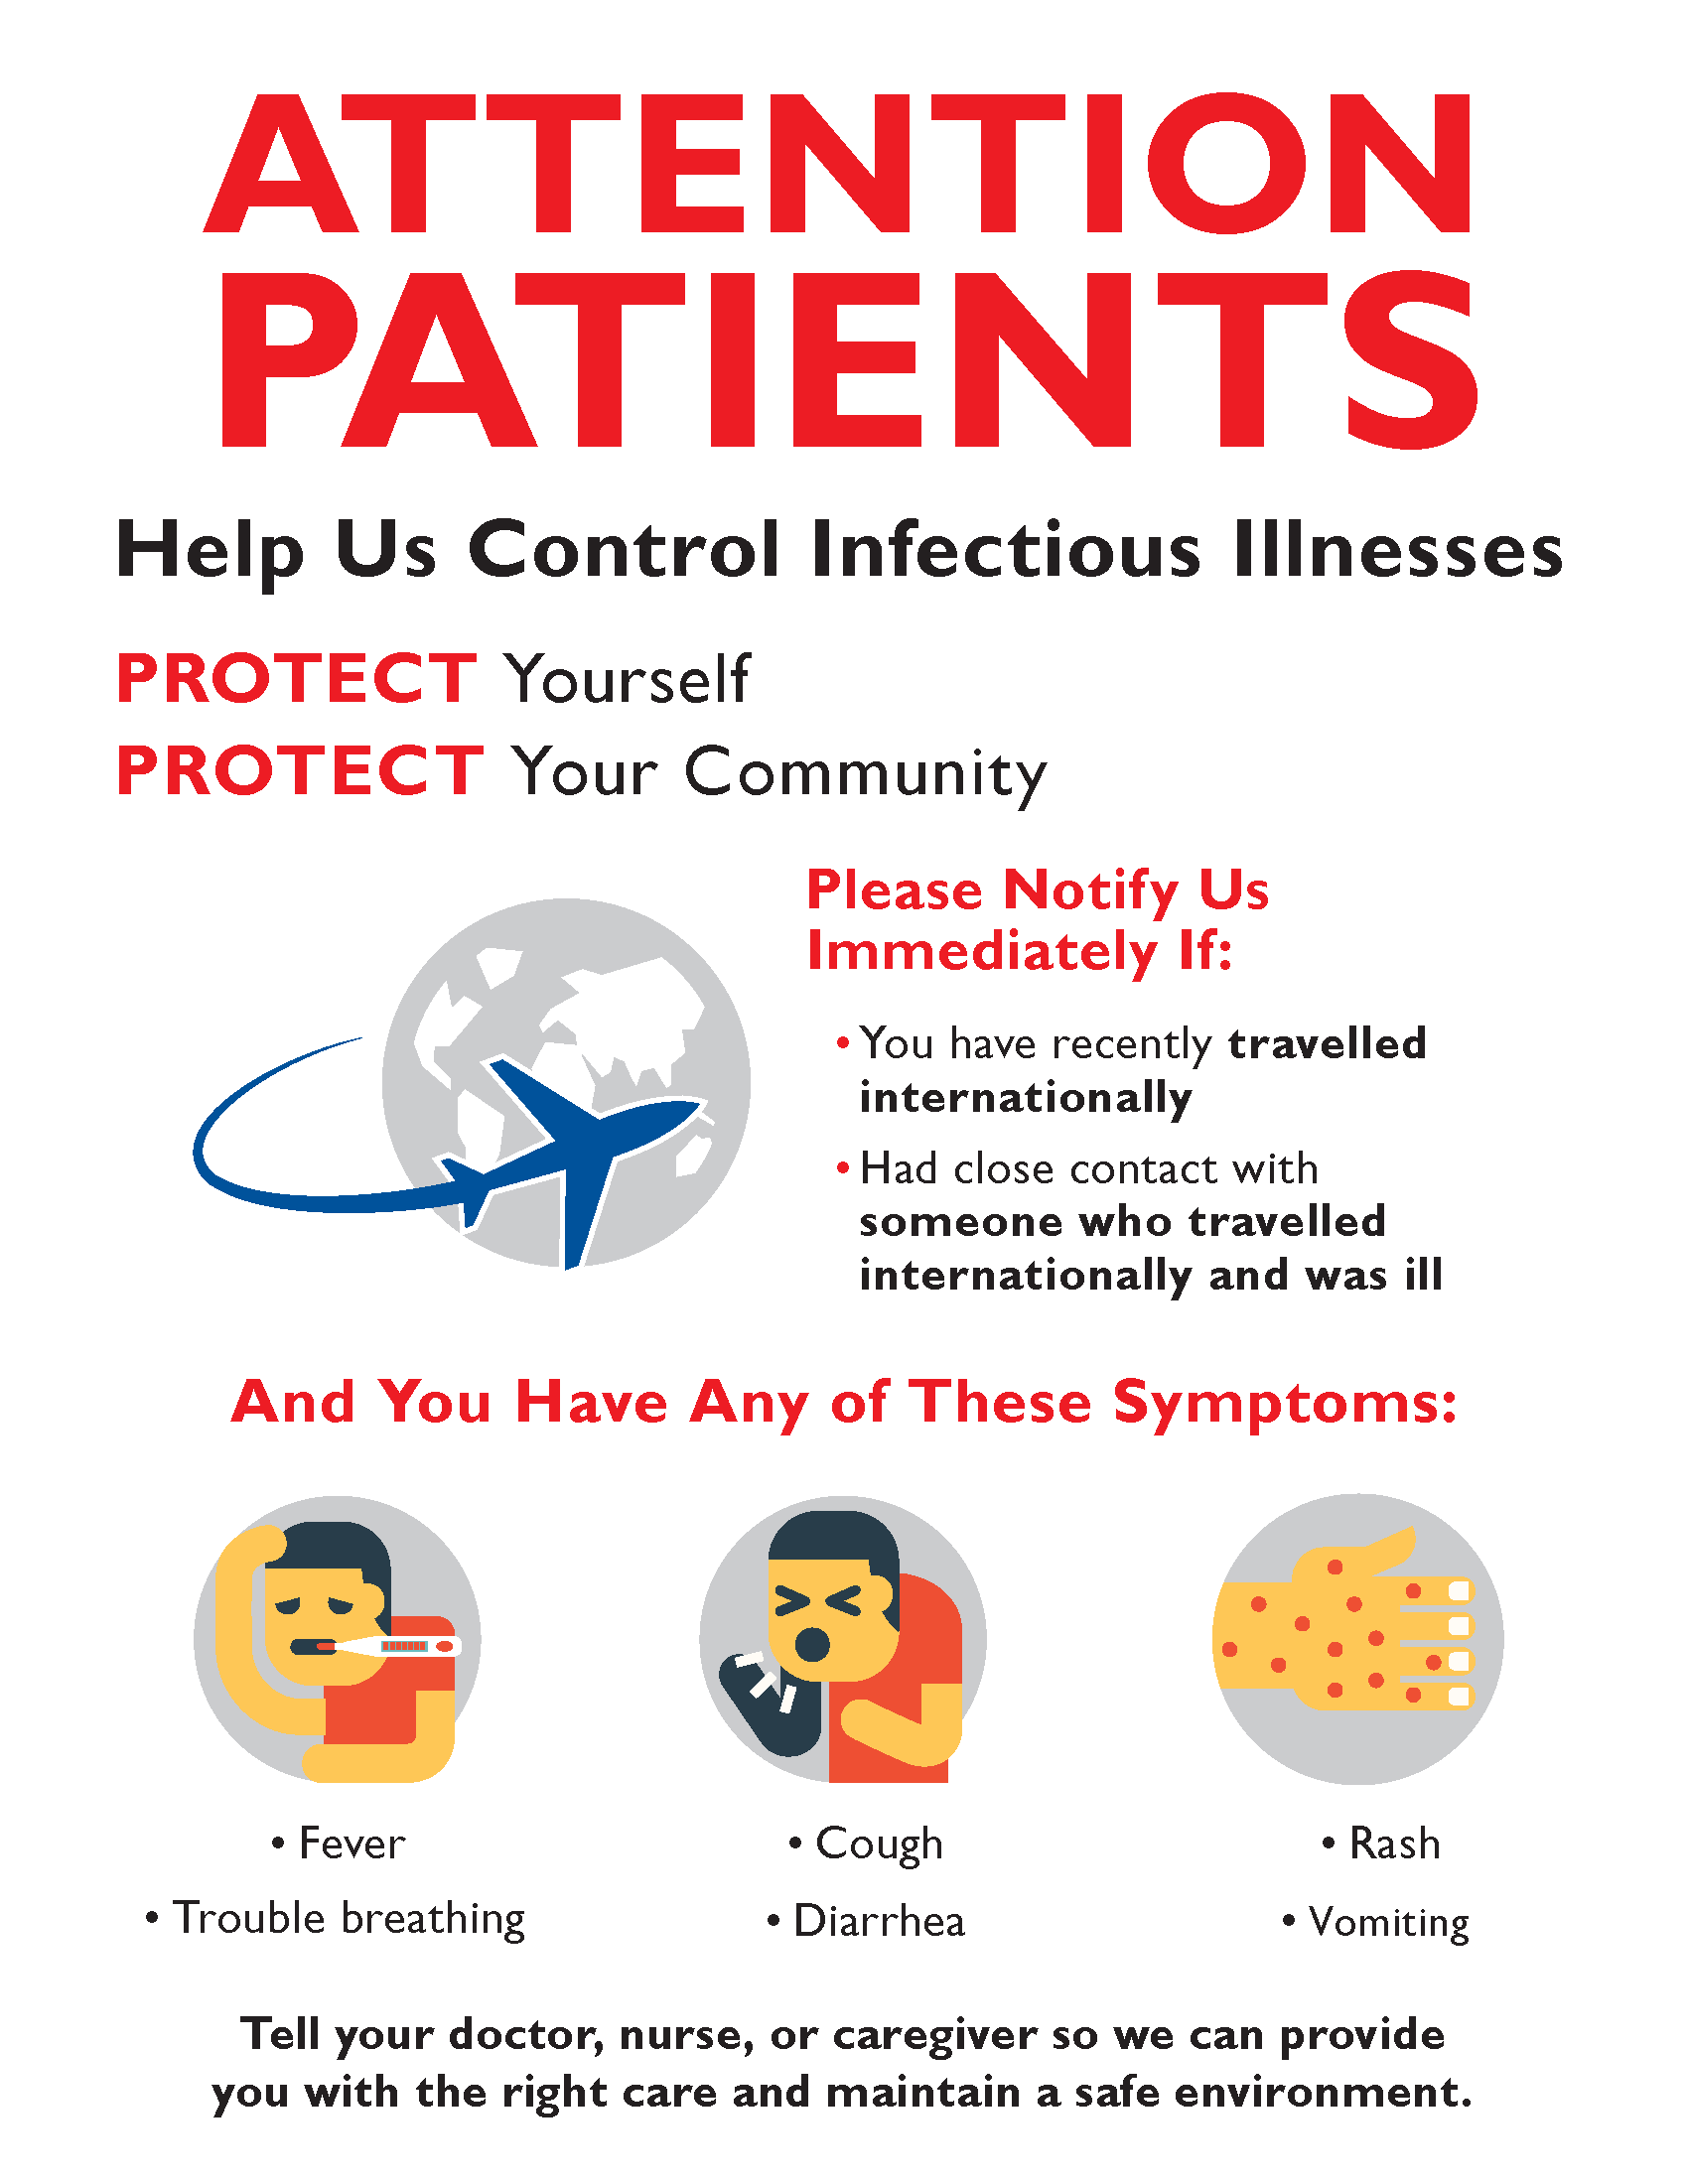 Help control infectious illness information